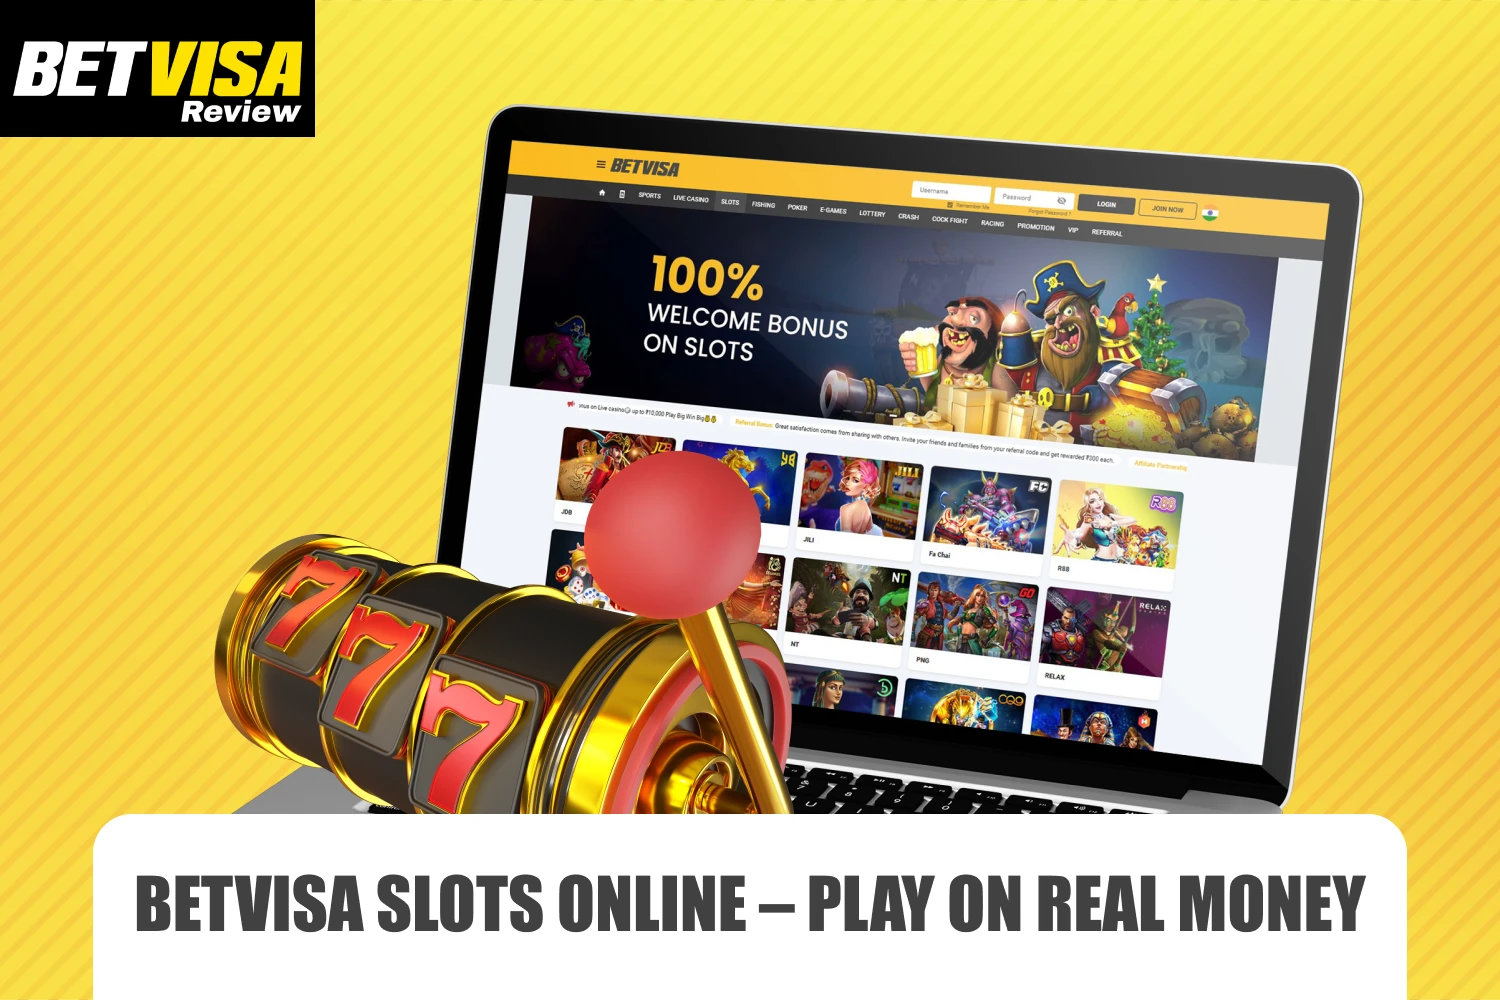 Betvisa Casino offers a wide selection of slot machines for Indian players